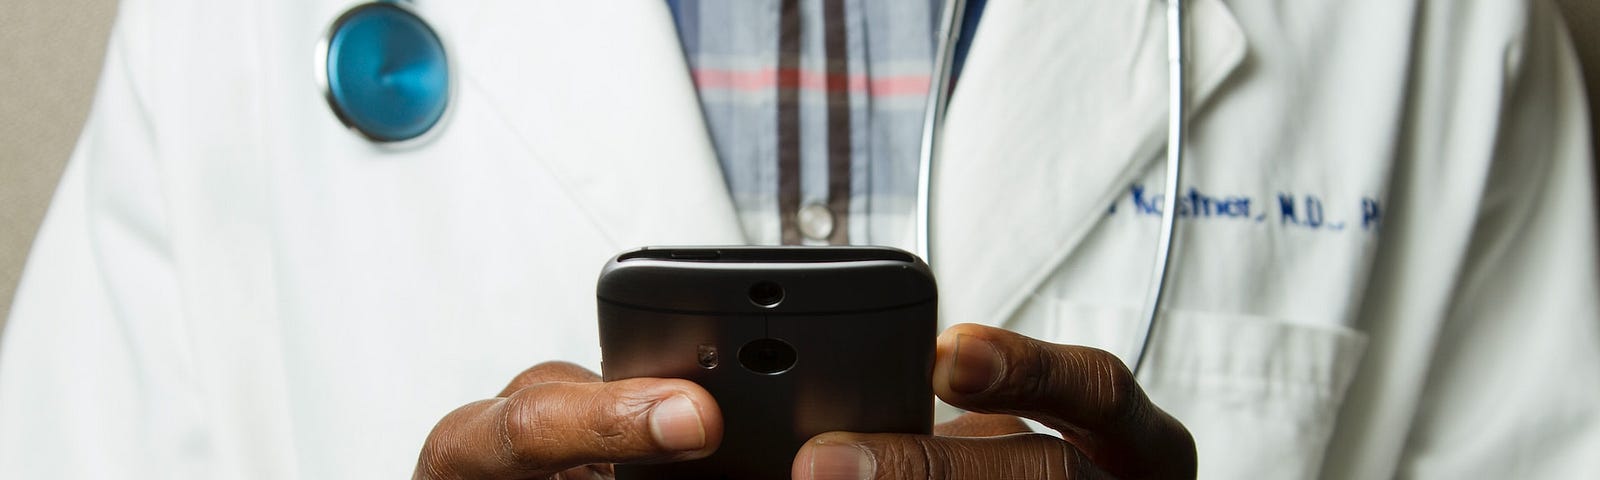 The torso of a Black doctor wearing a flannel shirt, stethoscope, and a white physician’s coat while holding a cell phone with both hands